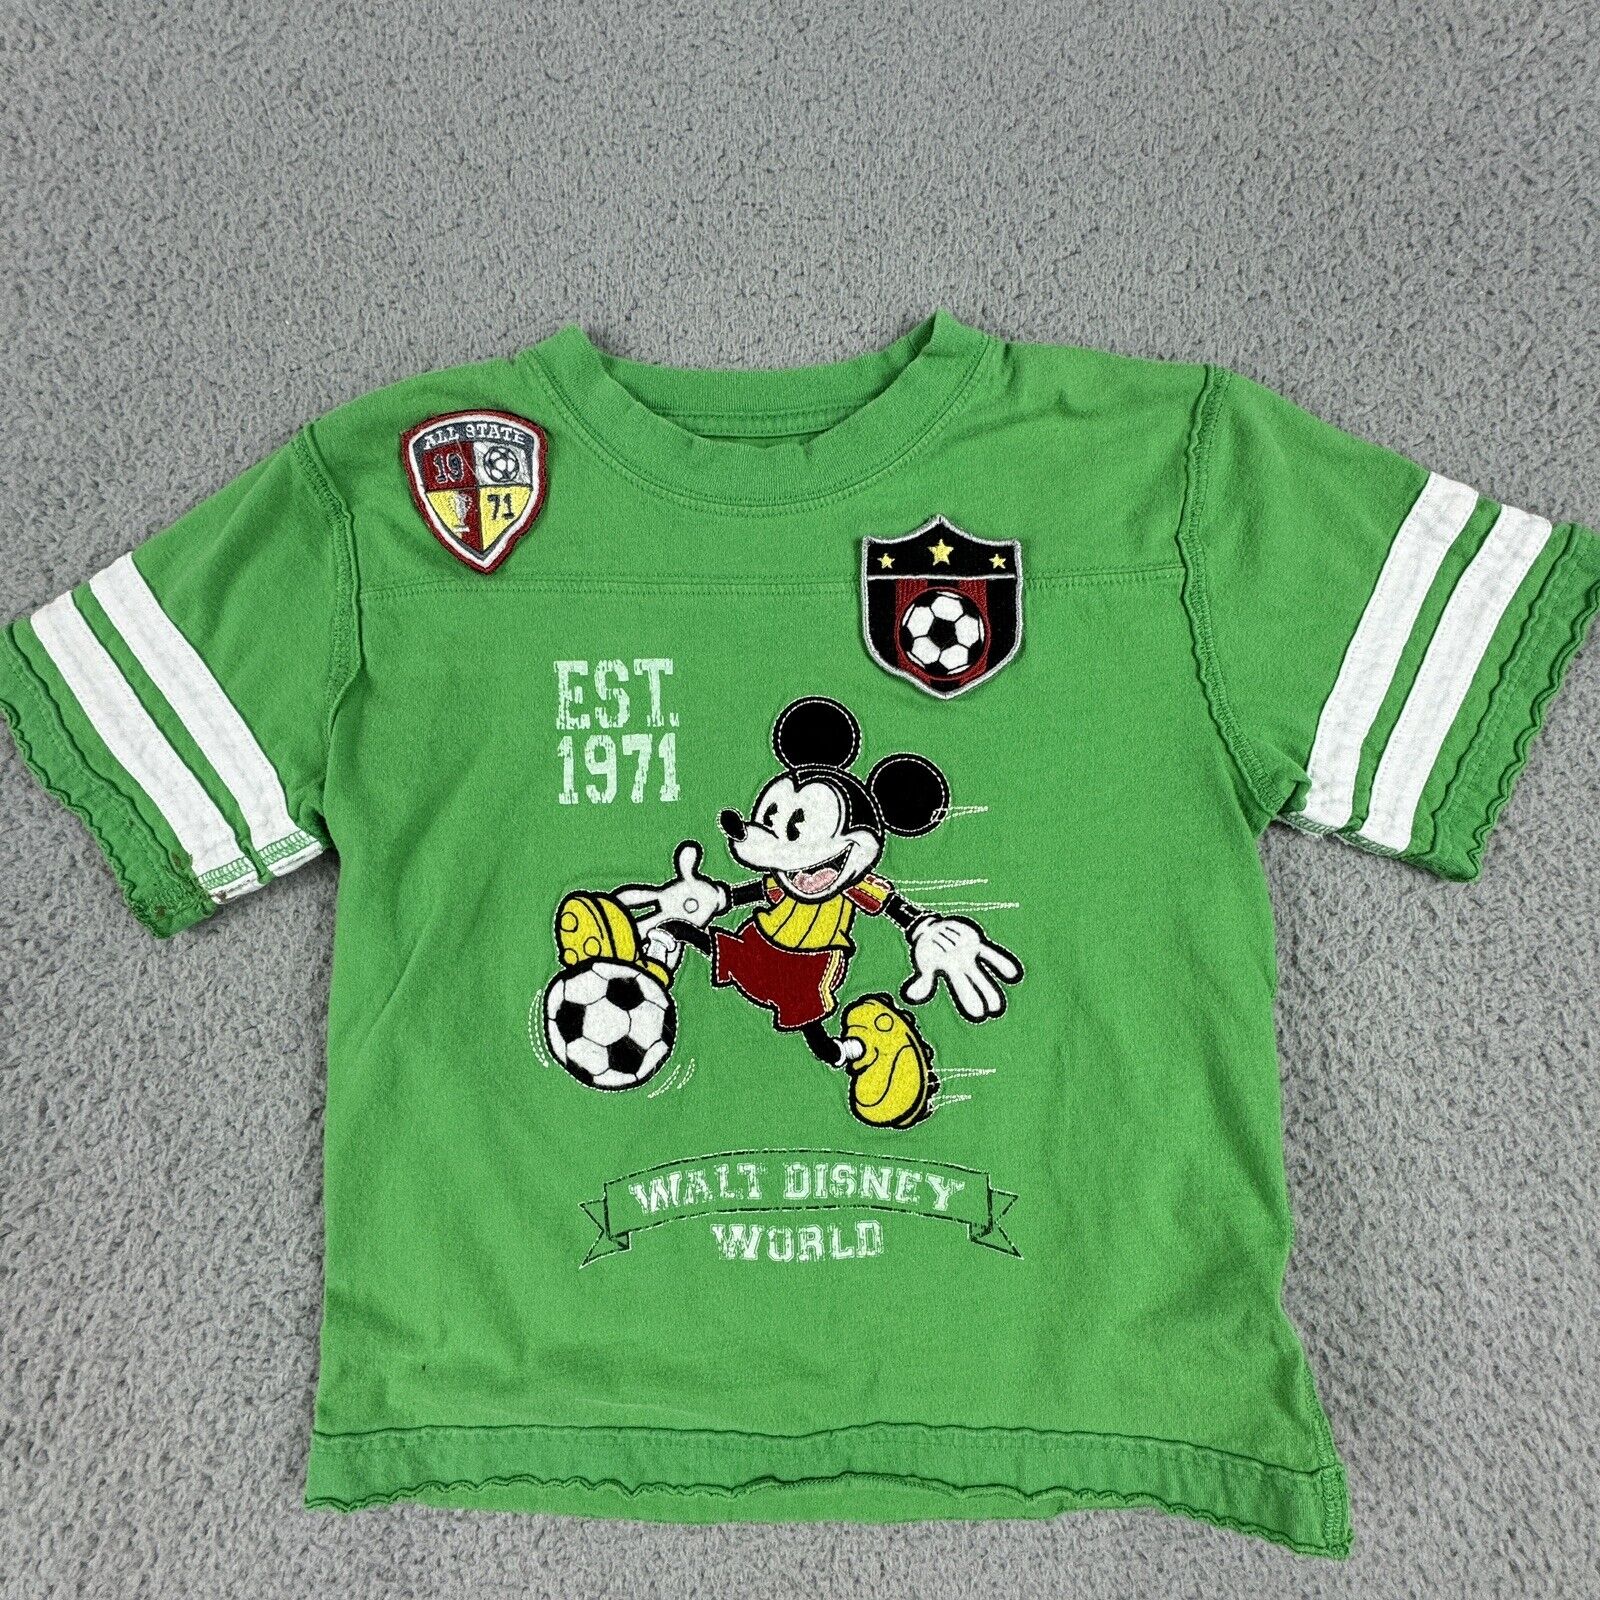 VTG Disney Parks Shirt Boys XS Green Mickey Mouse Soccer Athletic Embroidered